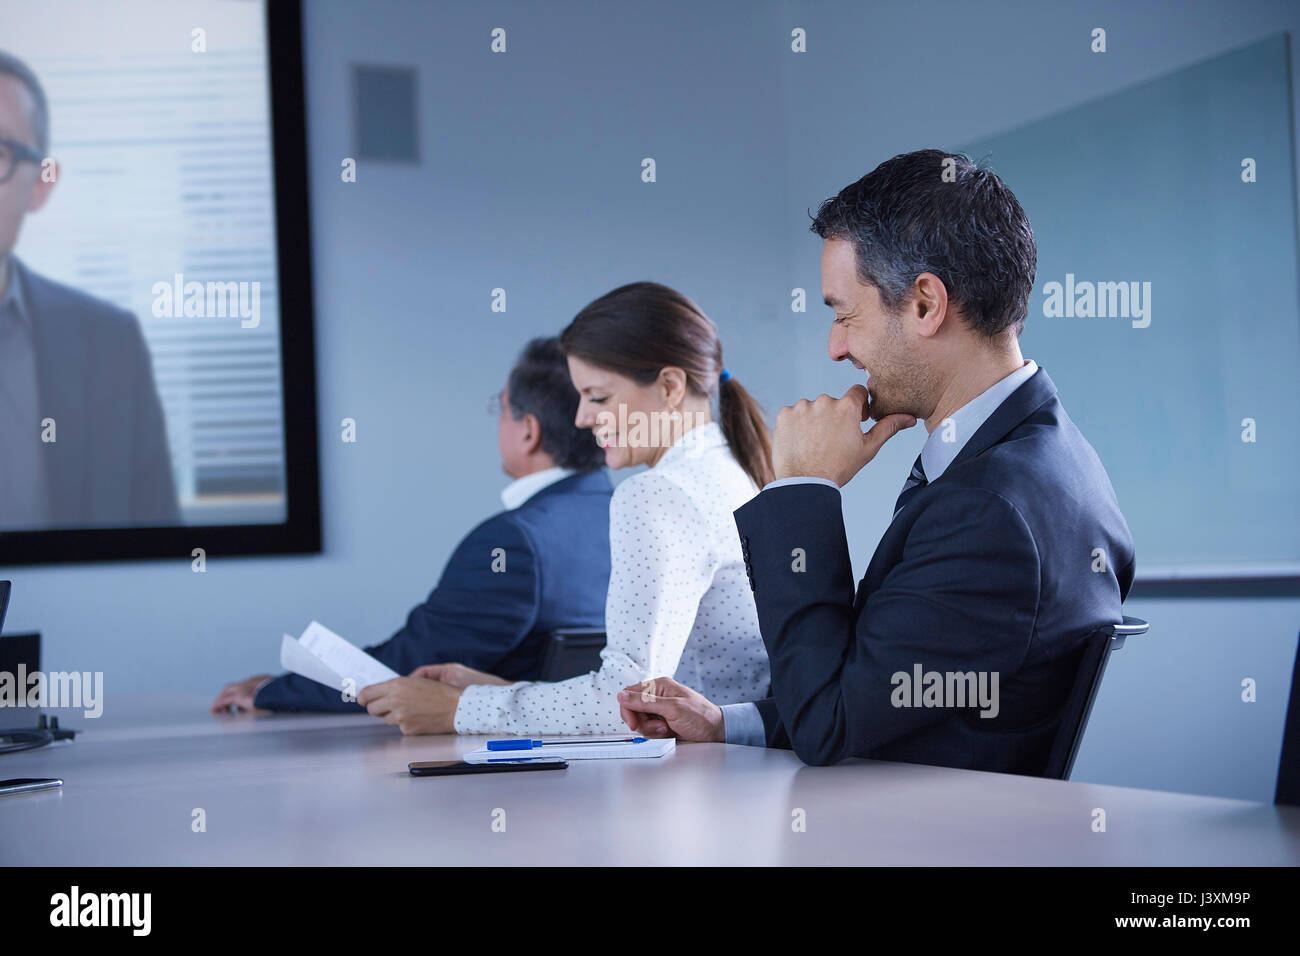 Businesswoman and man smirking during office conference call Stock Photo